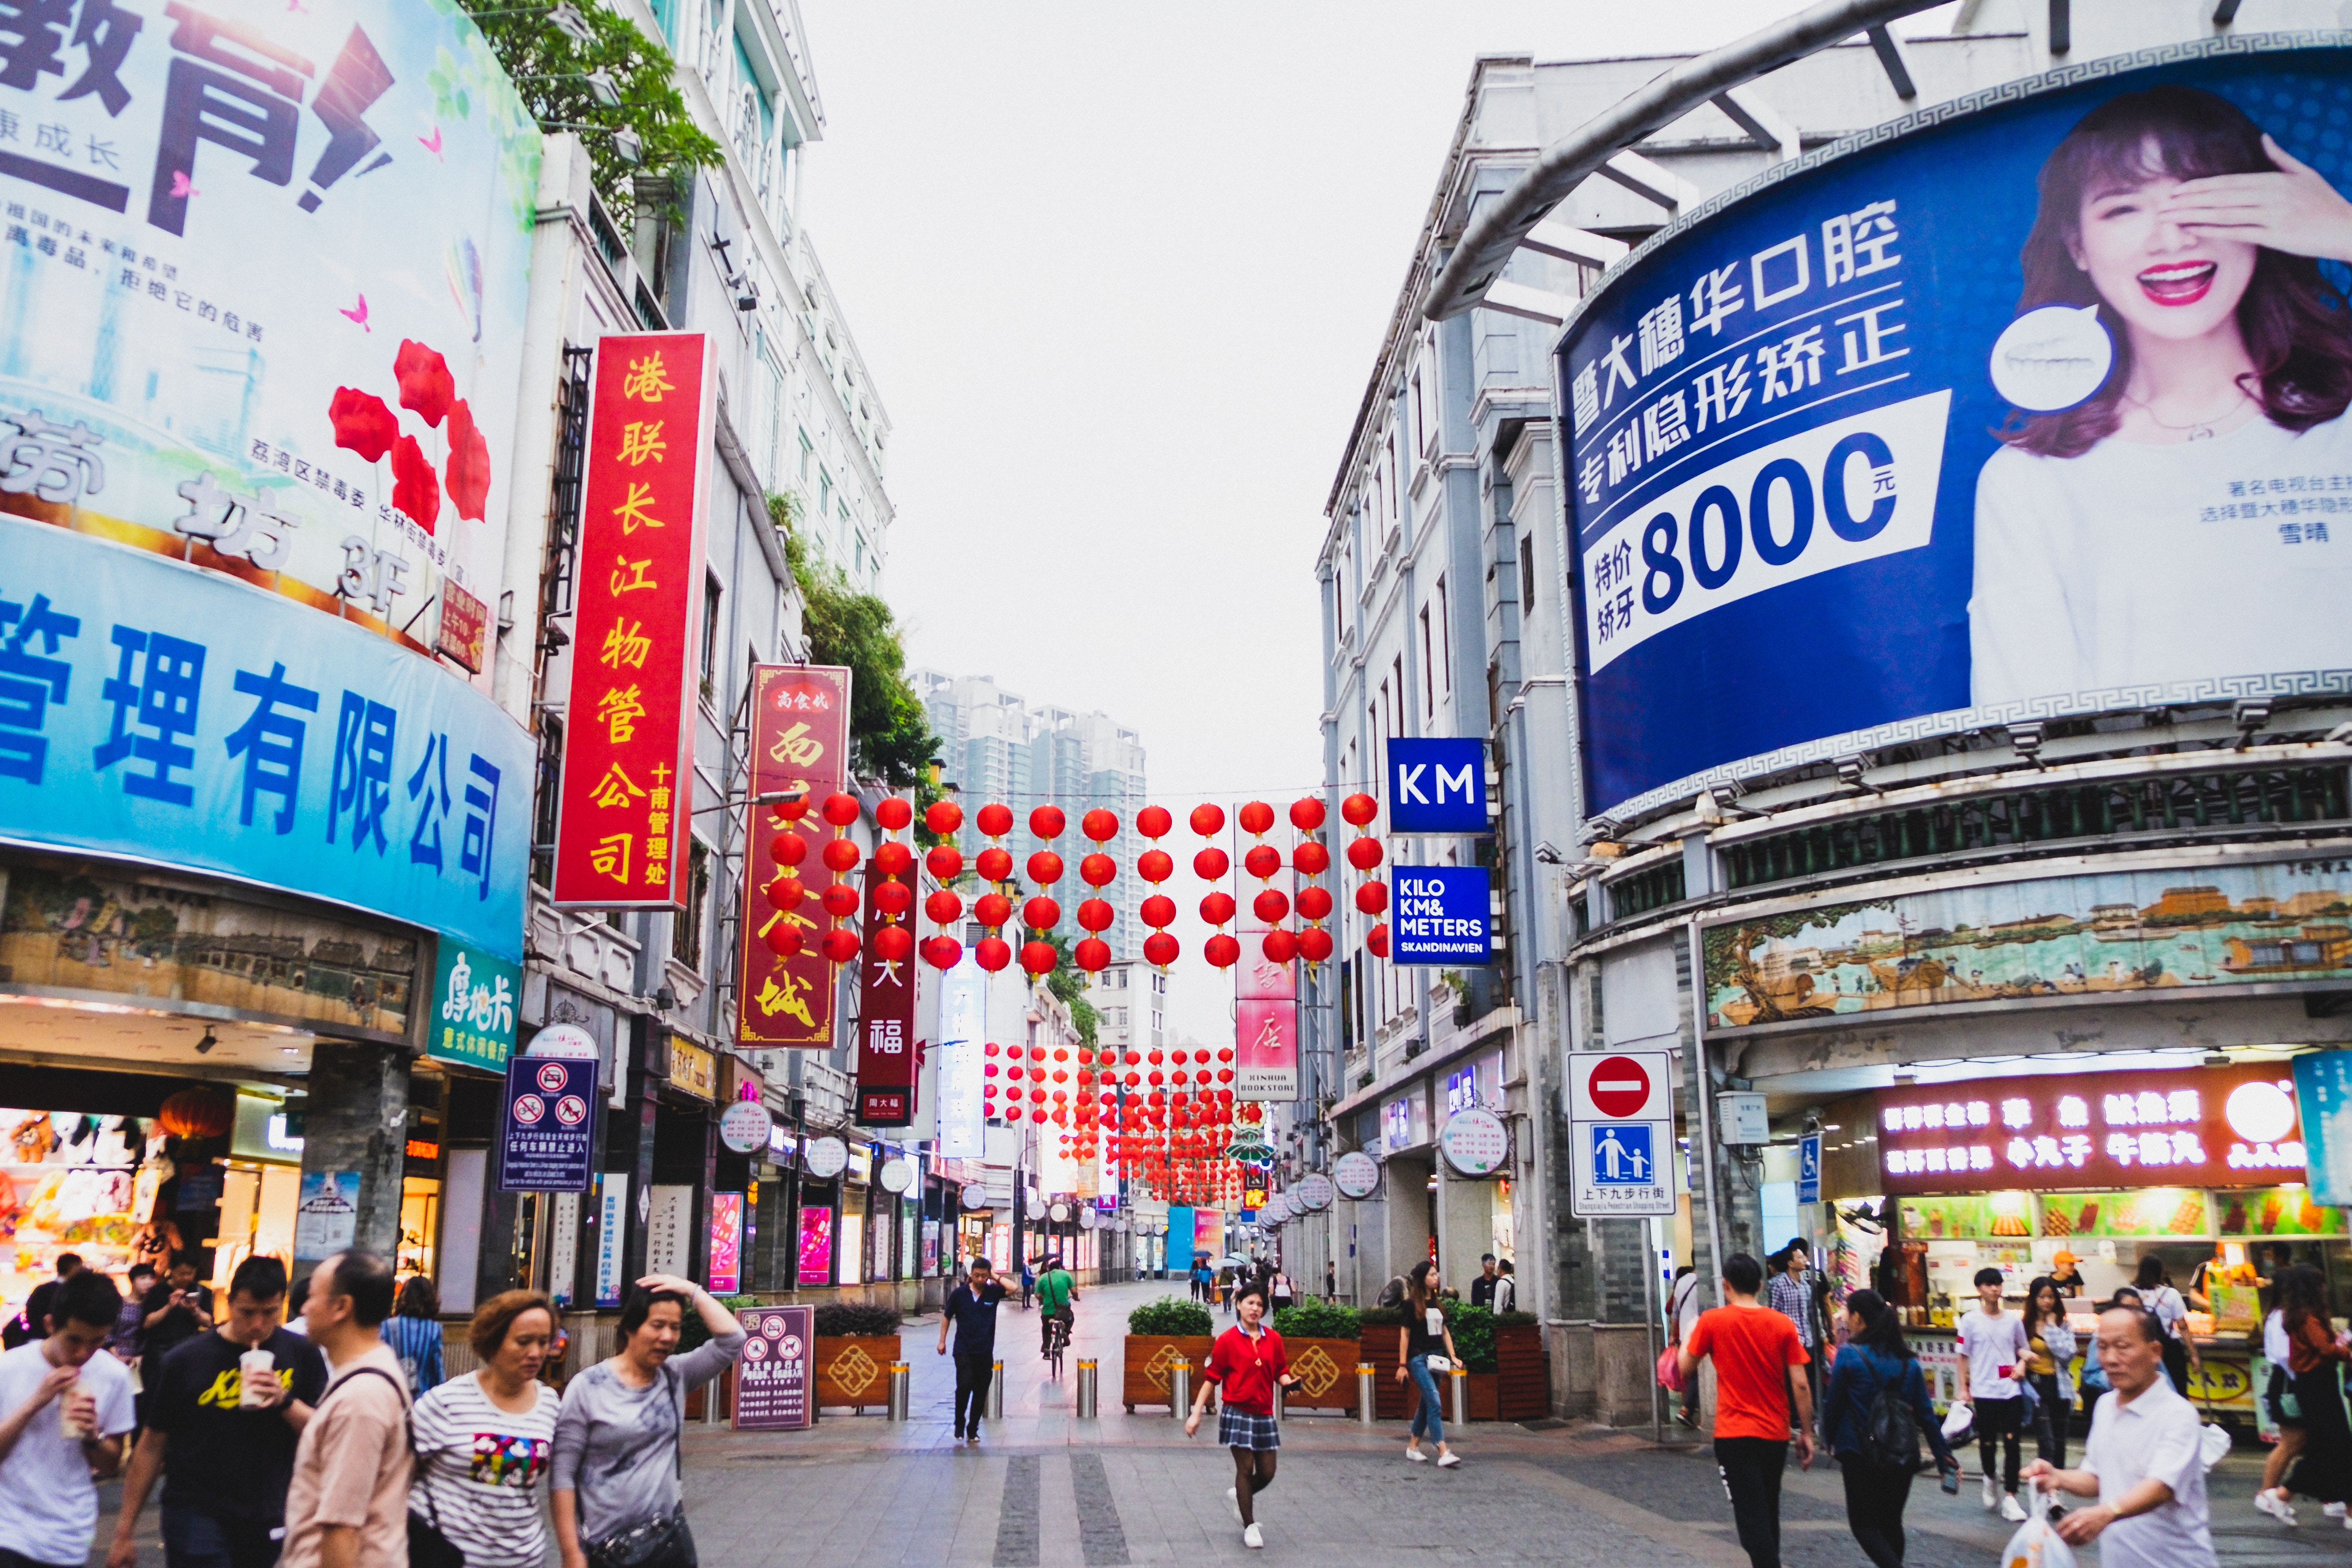 Understanding the Chinese tourism market